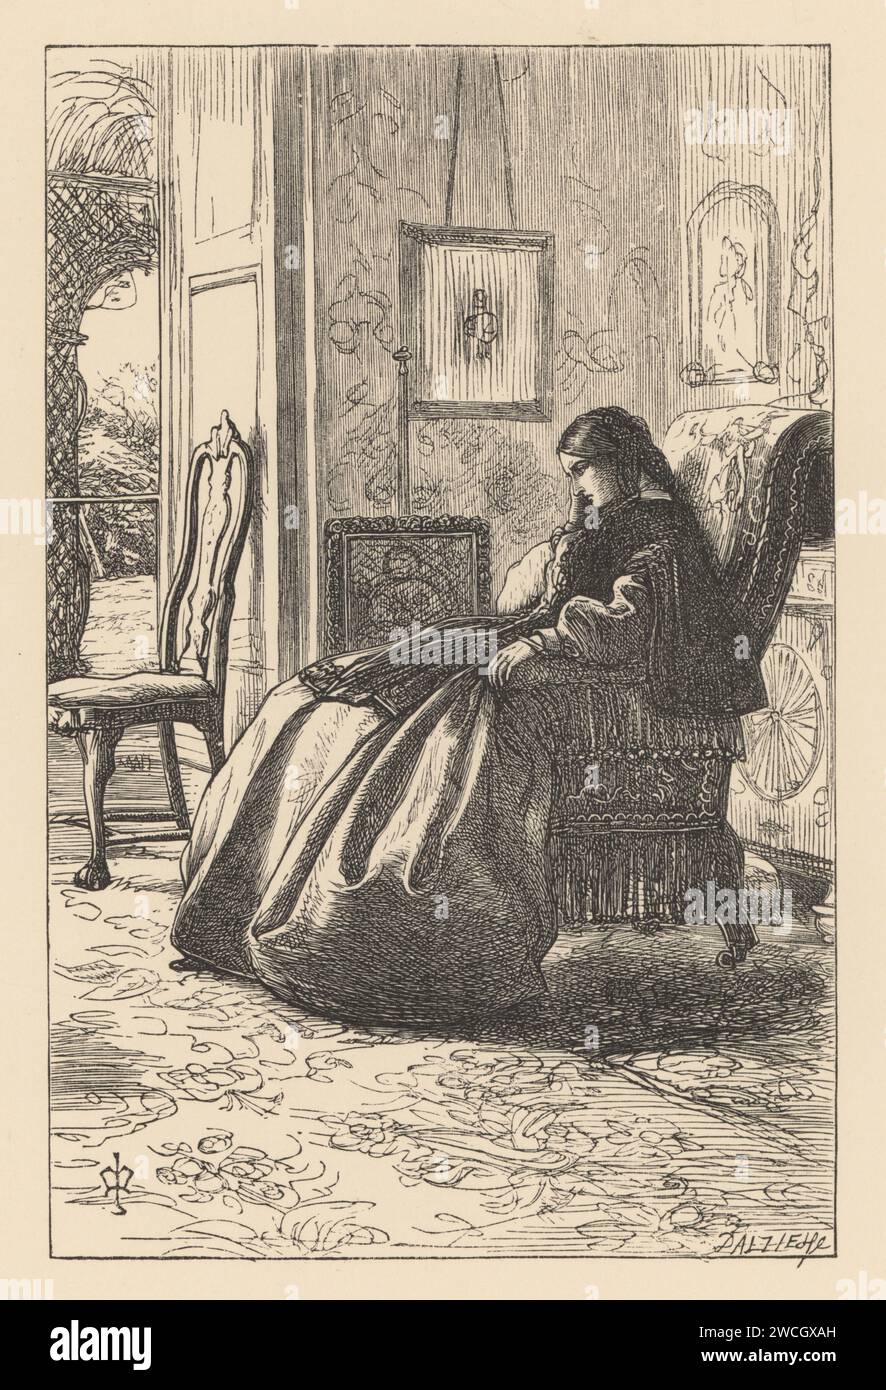 Sad Victorian woman seated in a drawing room. There was sorrow in her heart. Book illustration from Anthony Trollope’s Orley Farm. Woodcut by the Dalziel brothers after an illustration by Pre-Raphaelite artist John Everett Millais from Millais’ Illustrations, a Collection of Drawings on Wood, Alexander Strahan, London, 1866. Stock Photo